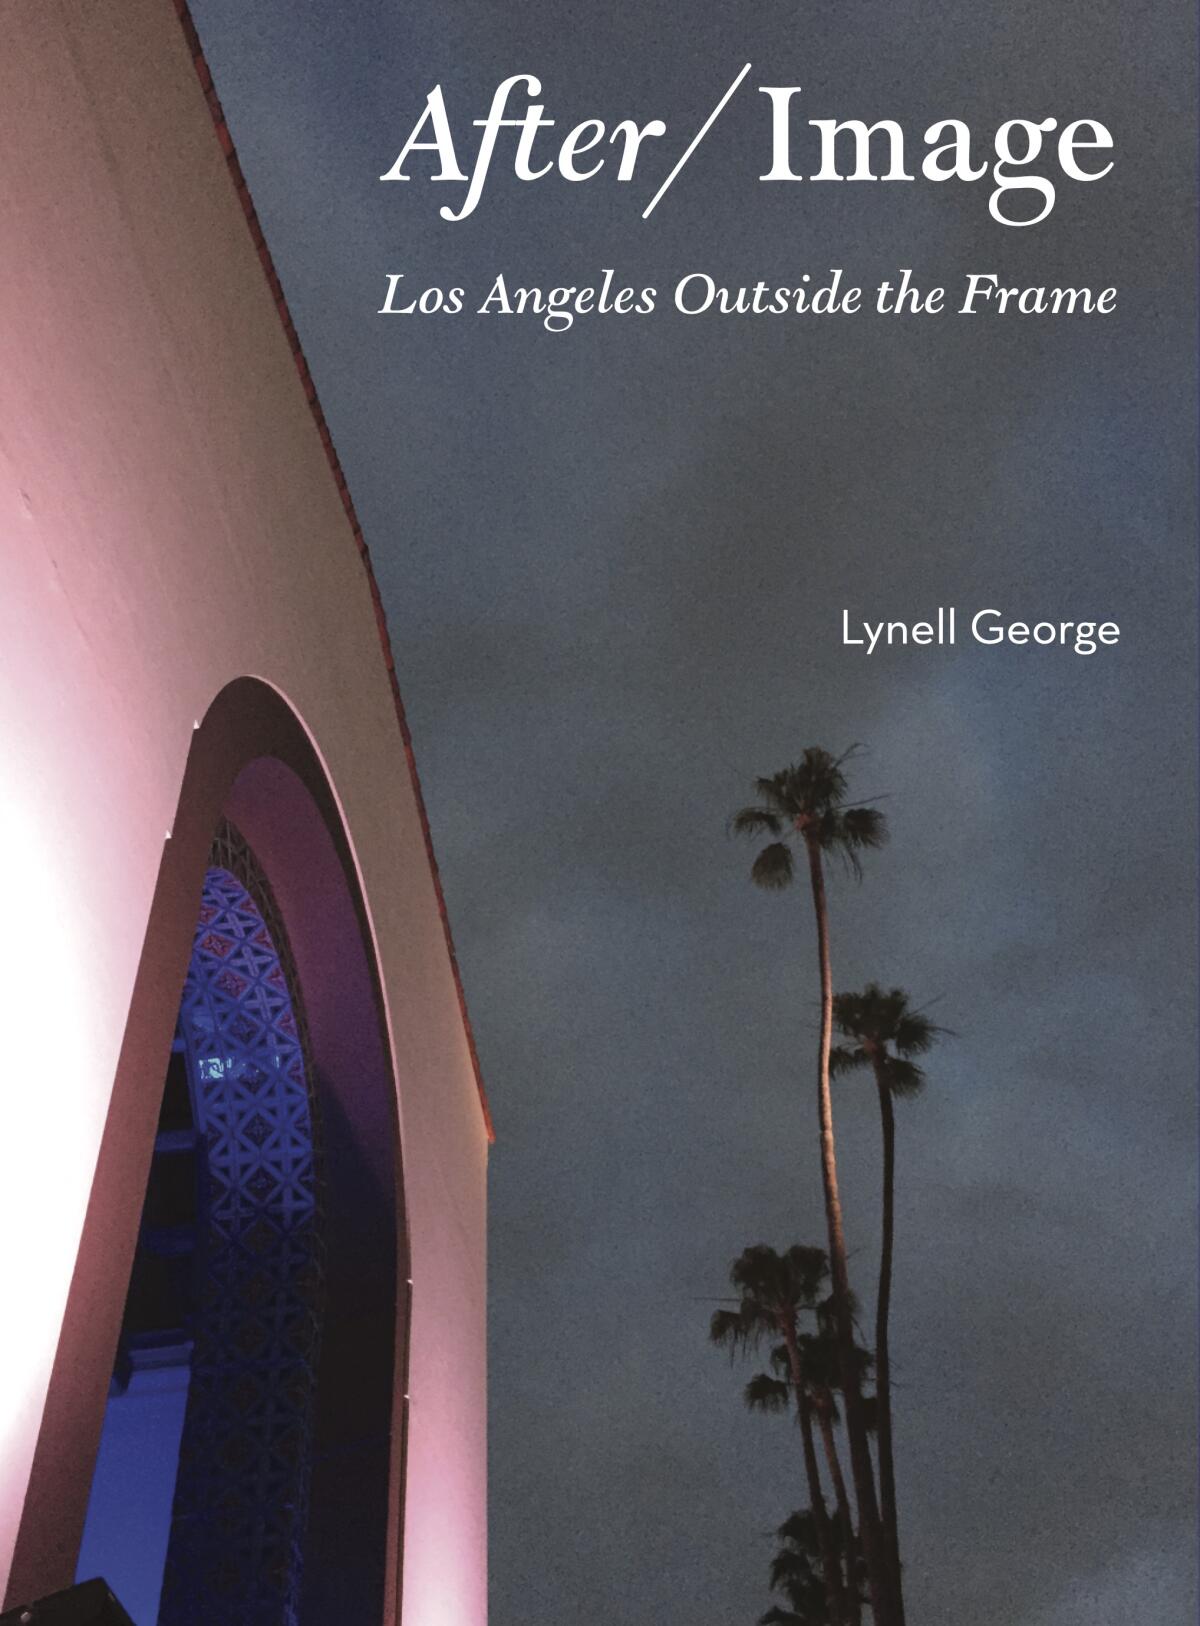 "After/Image: Los Angeles Outside the Frame" by Lynell George